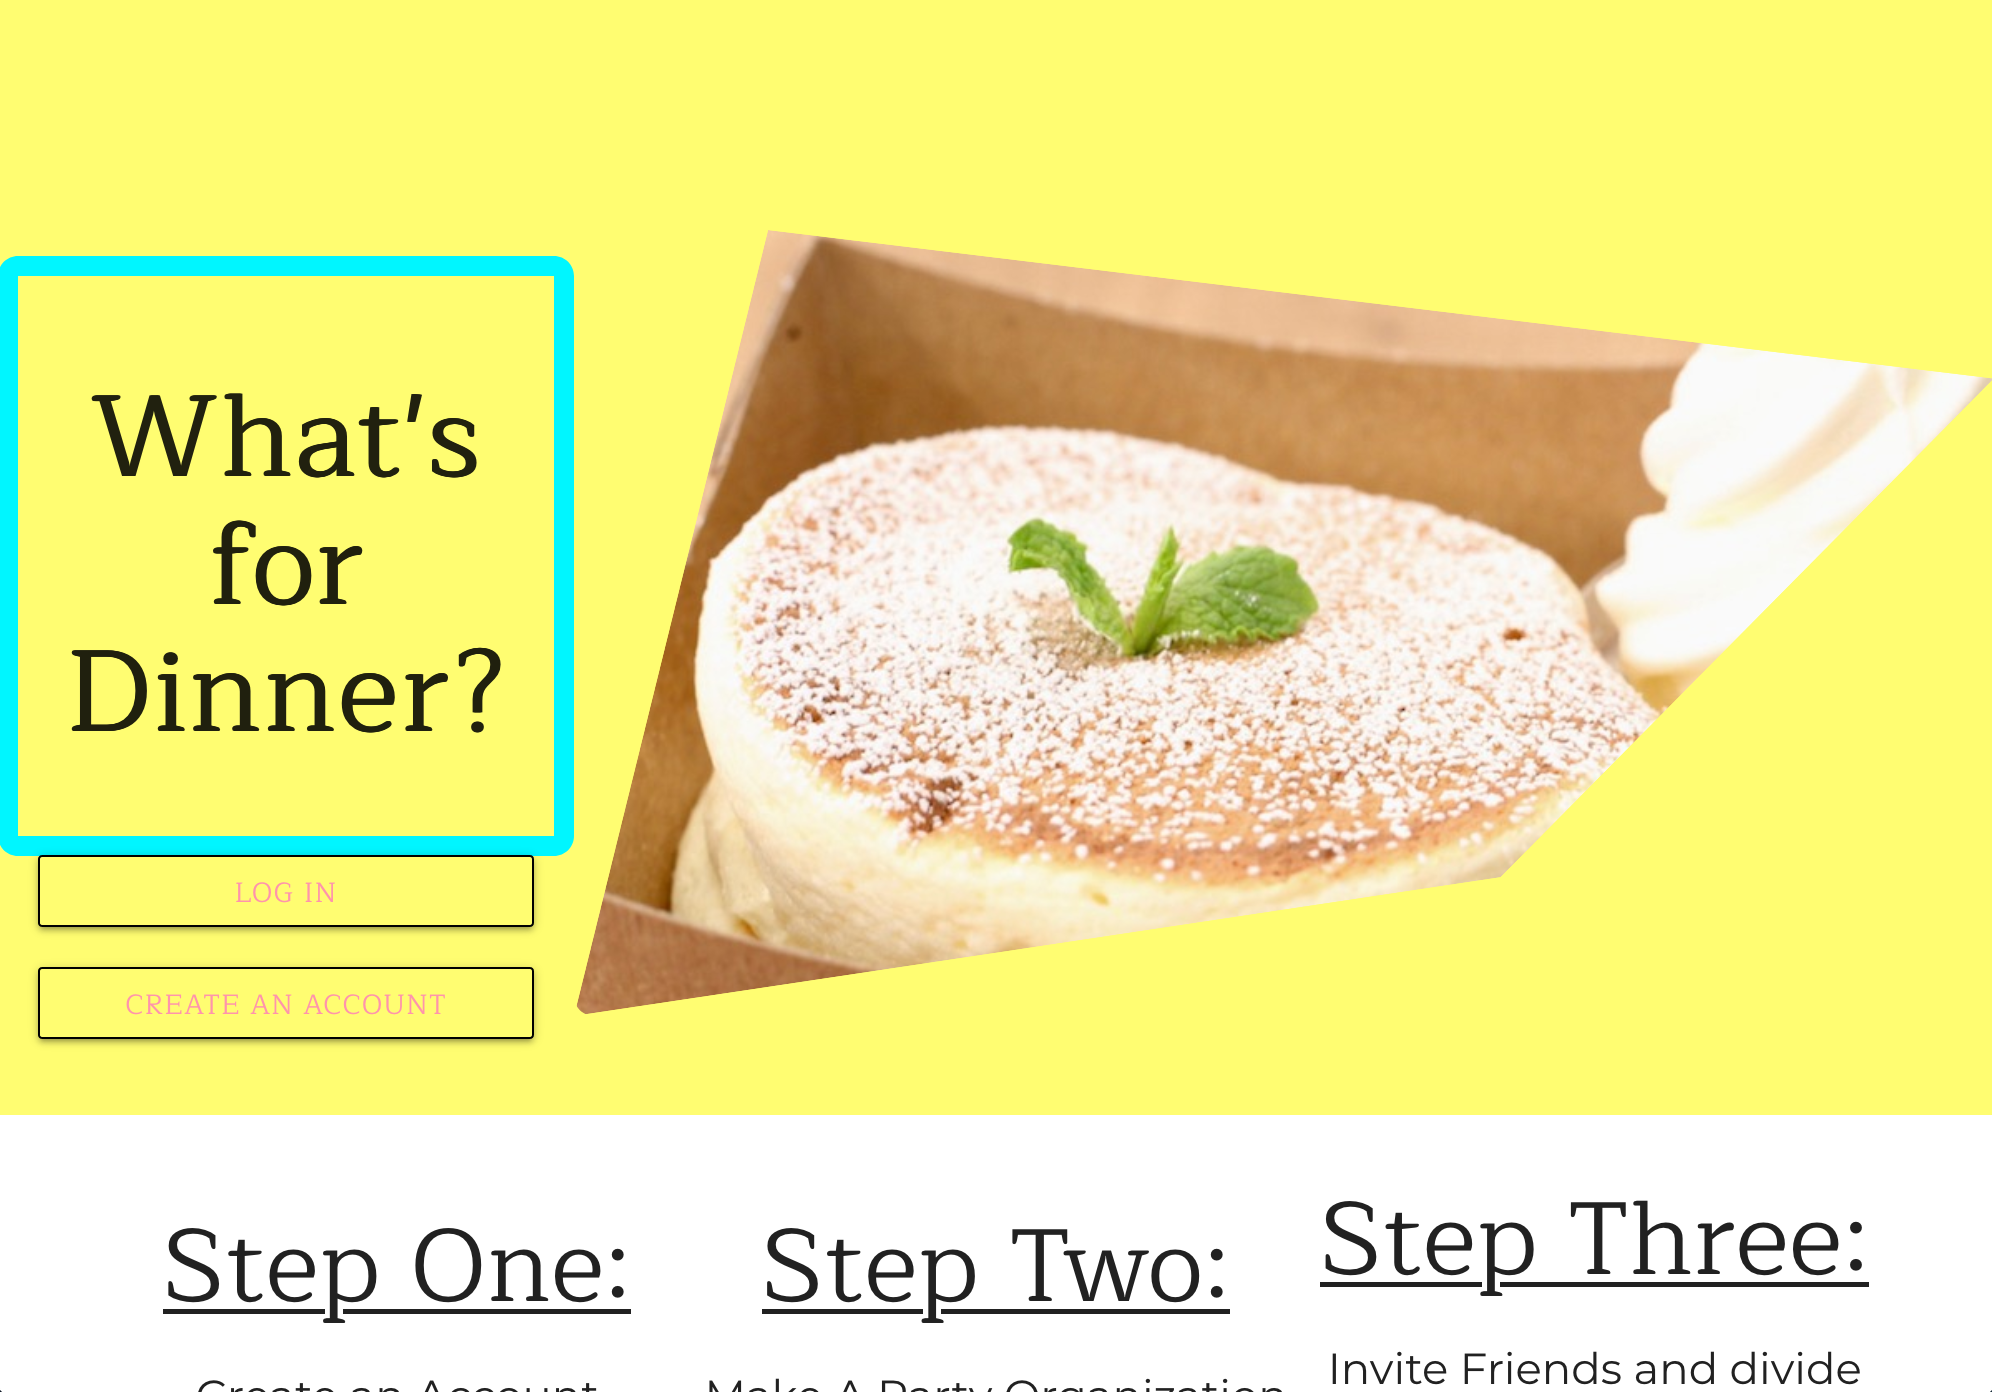 A desktop screenshot of the What's For Dinner landing page